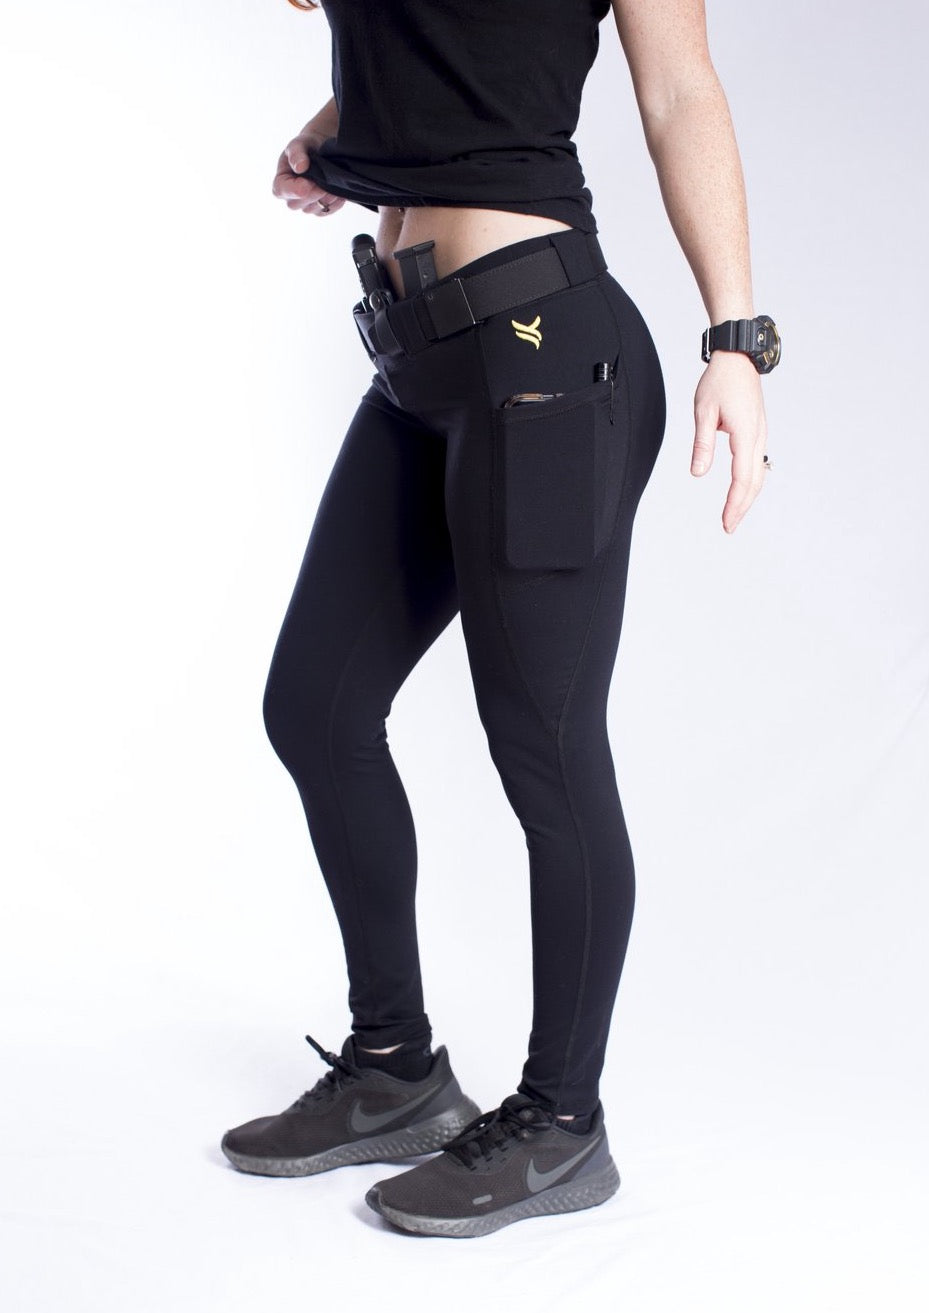 Tactical Leggings: What to Look for in Concealed Carry Leggings